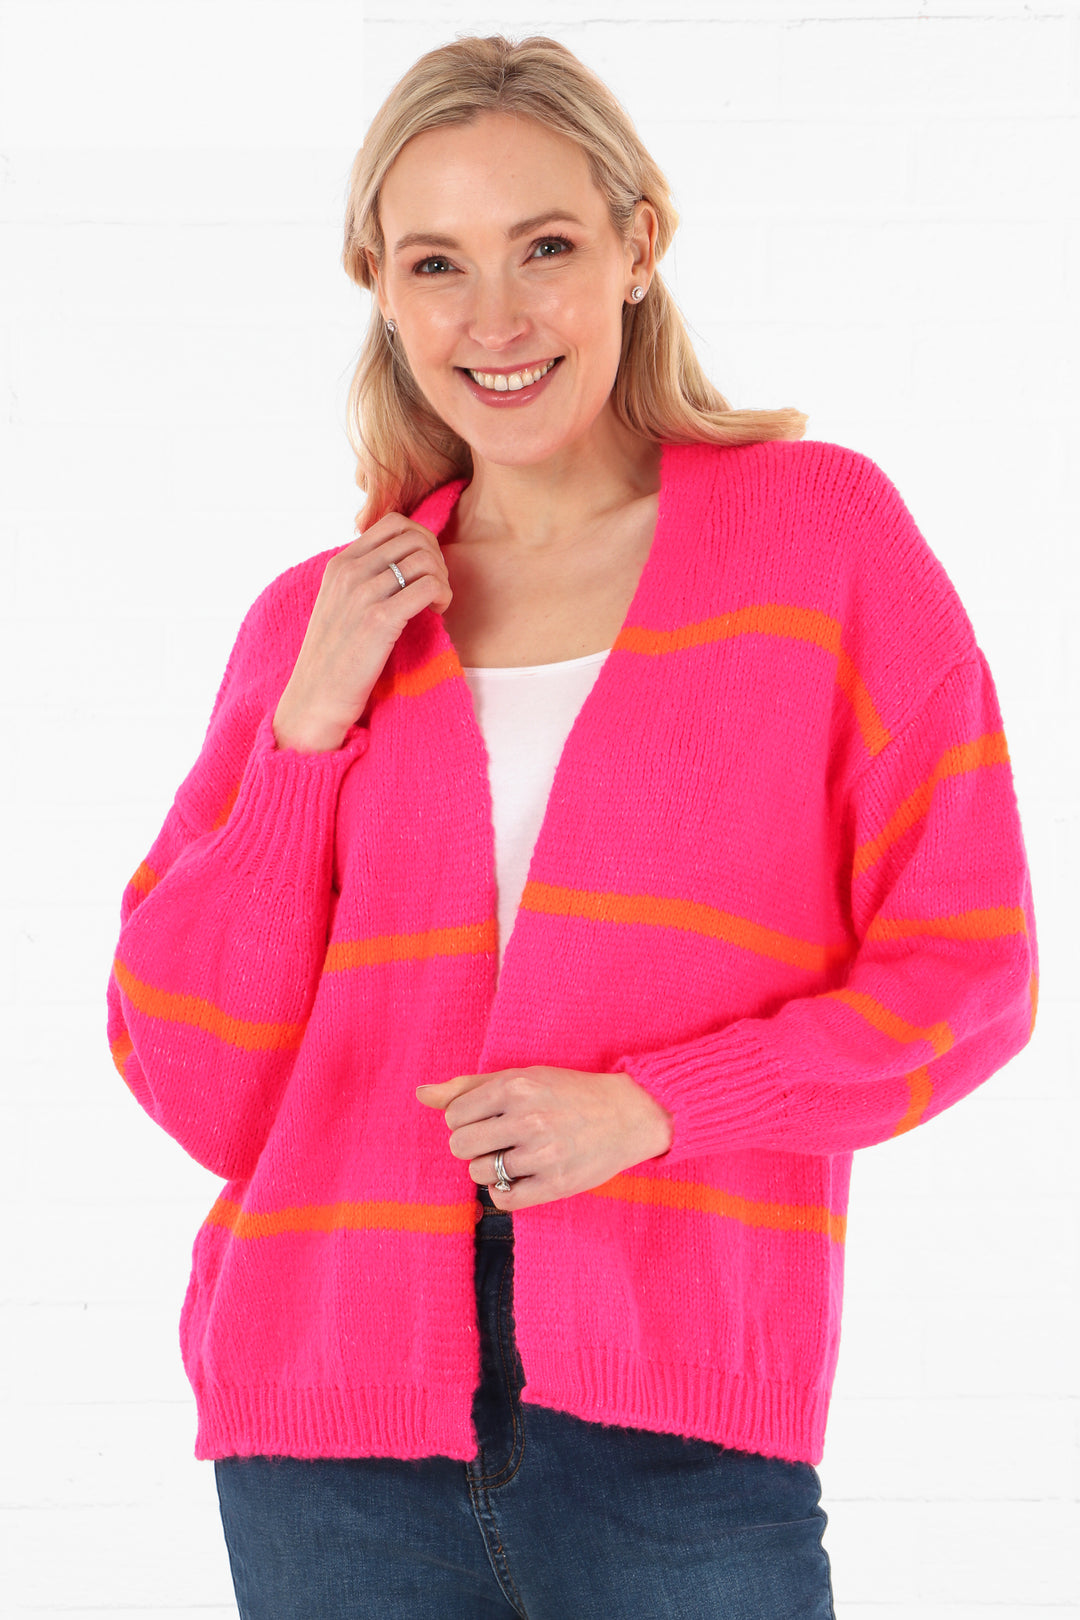 model wearing a pink open front cardigan with three orange horizontal stripes